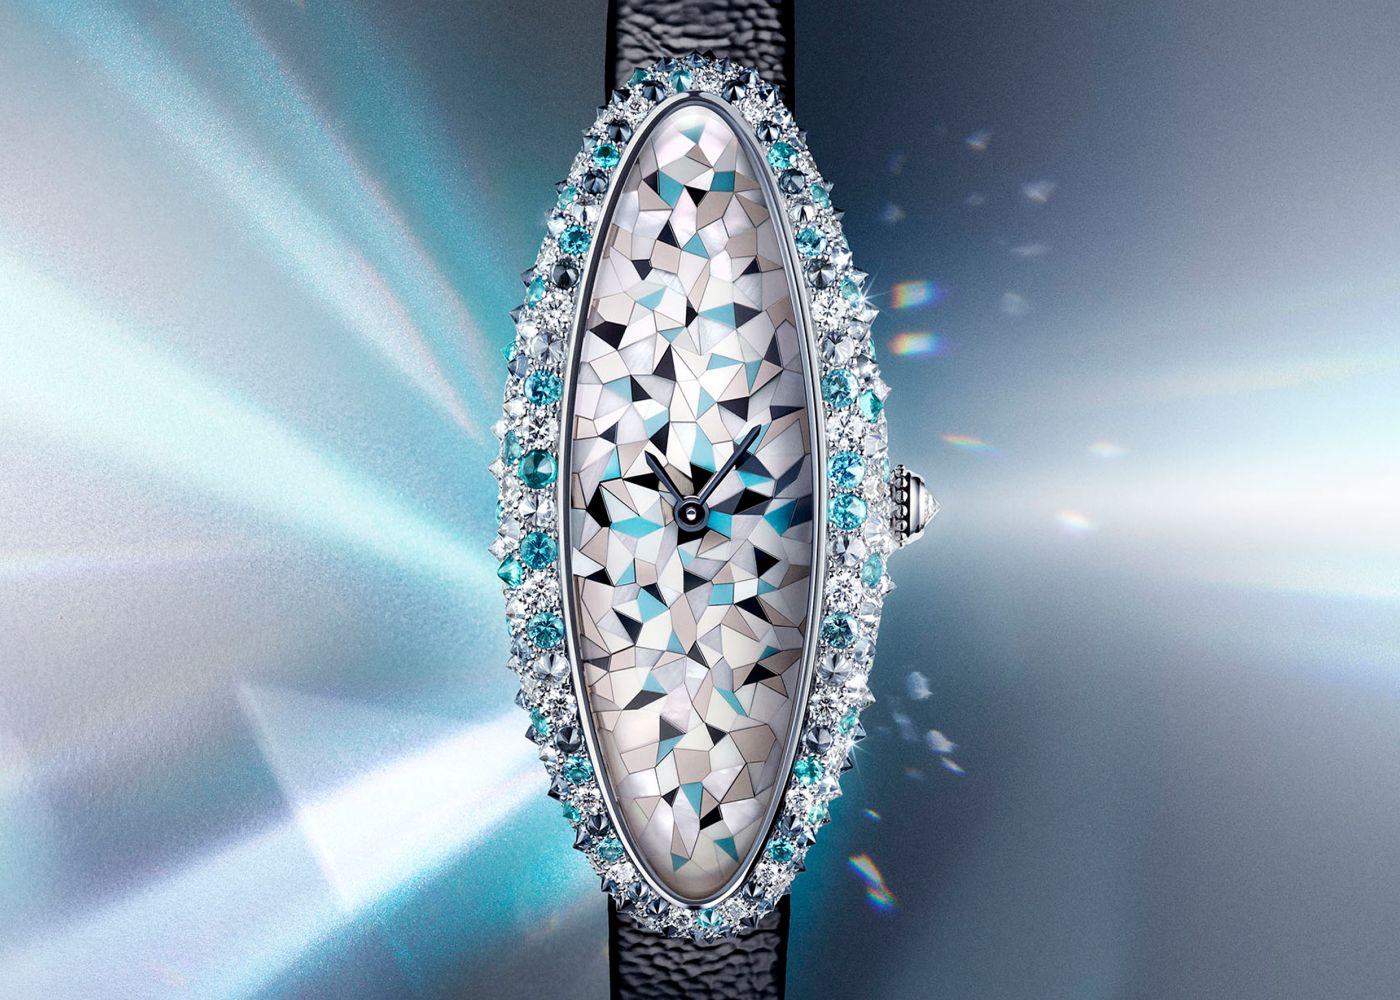 Métiers d’Art Baignoire Allongée watch in rhodium-finish white gold, blue tourmalines, grey and black spinels, mother-of-pear l, turquoise, onyx and diamond